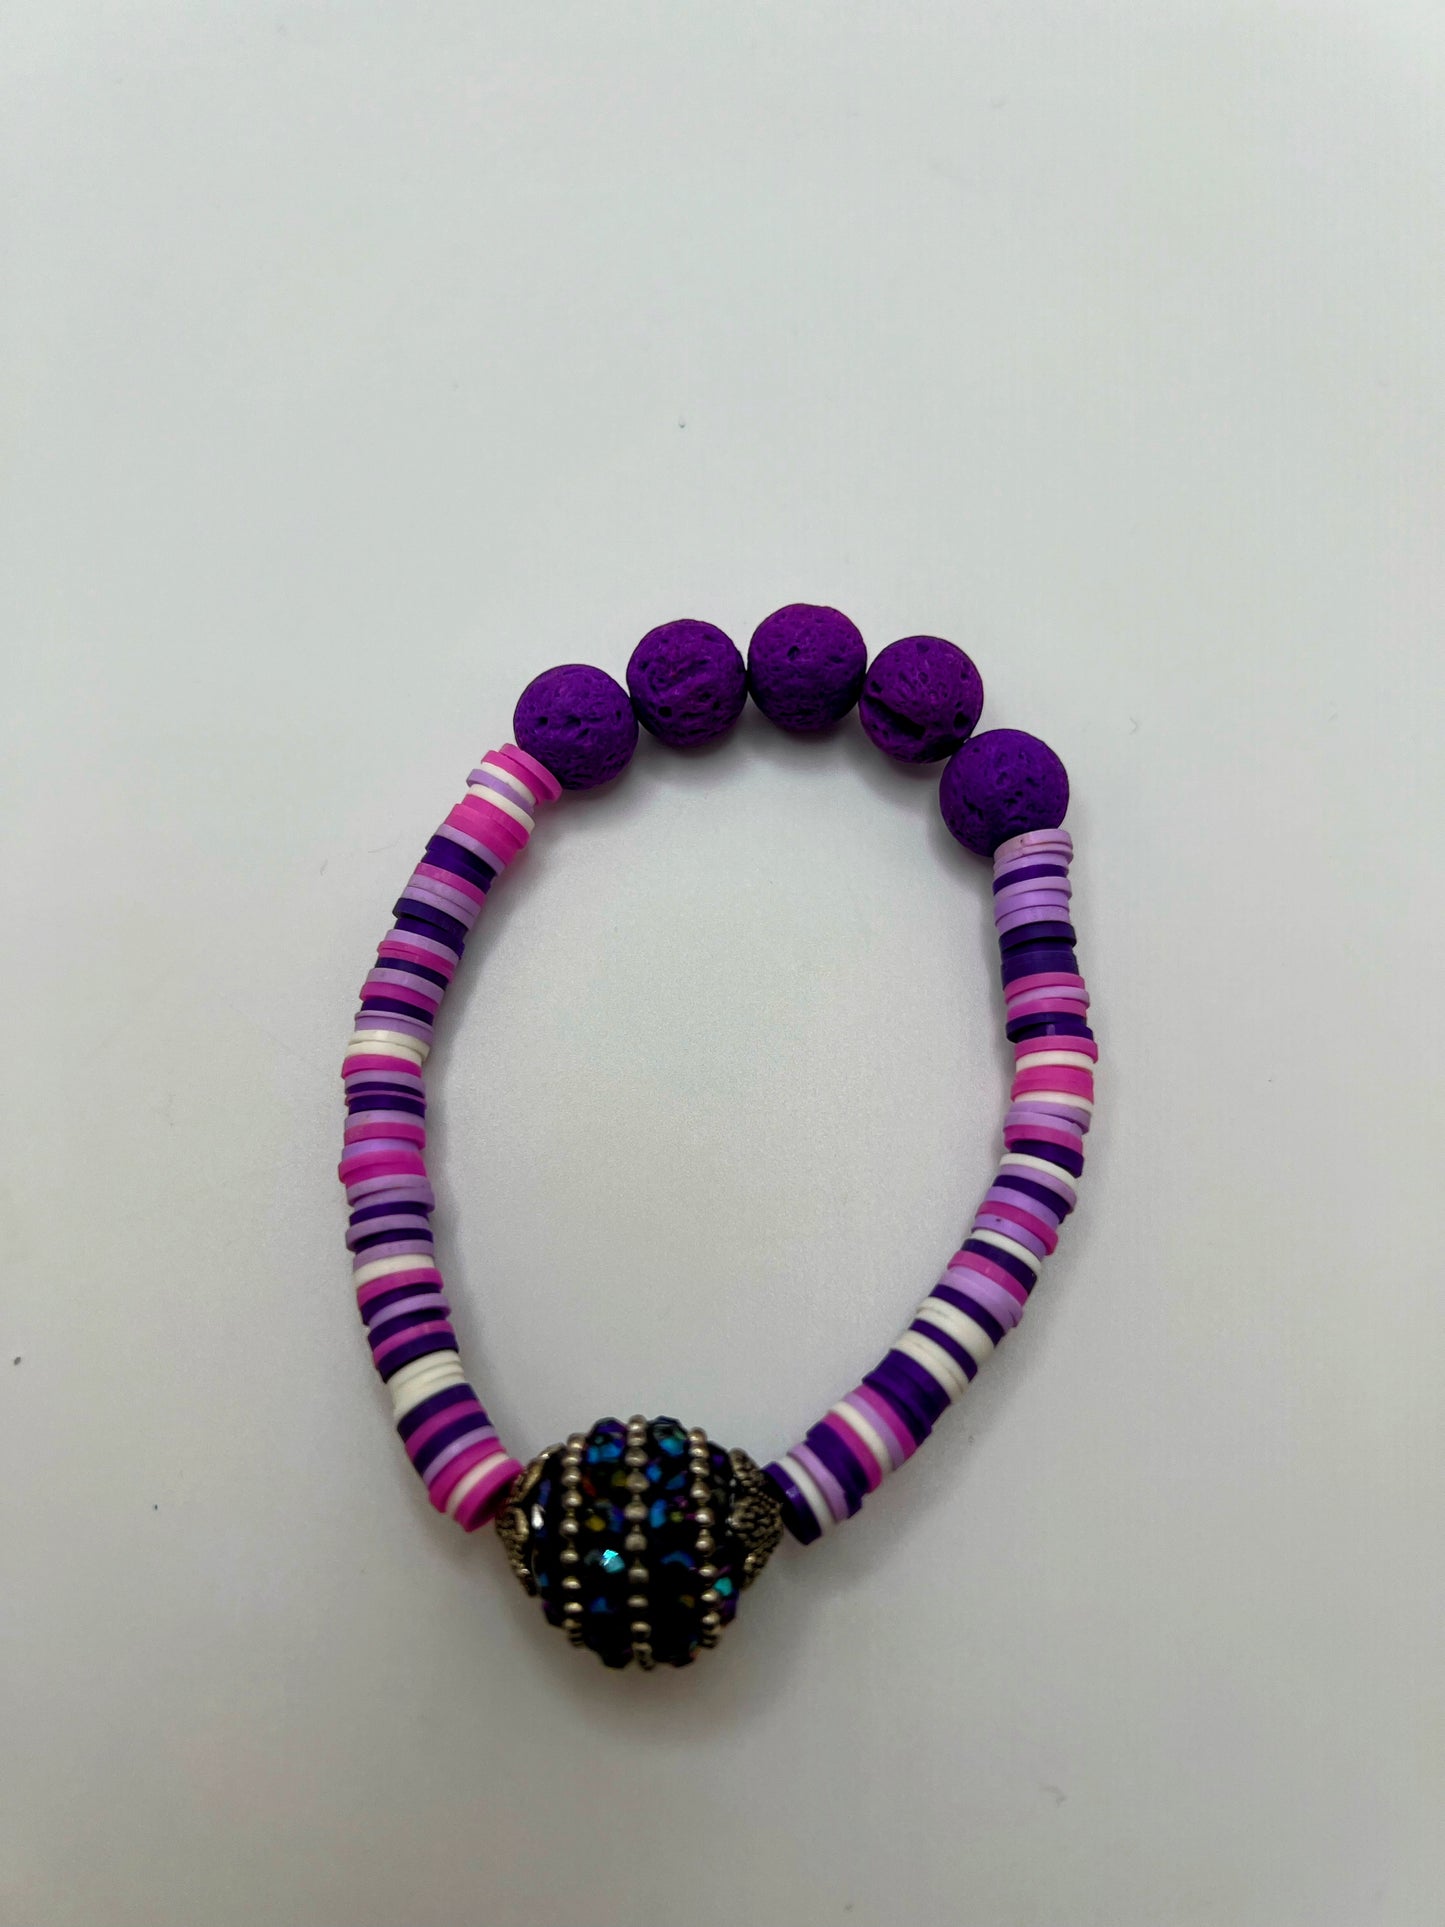 Lava Beads Aromatherapy Bracelet (Different Designs Available)